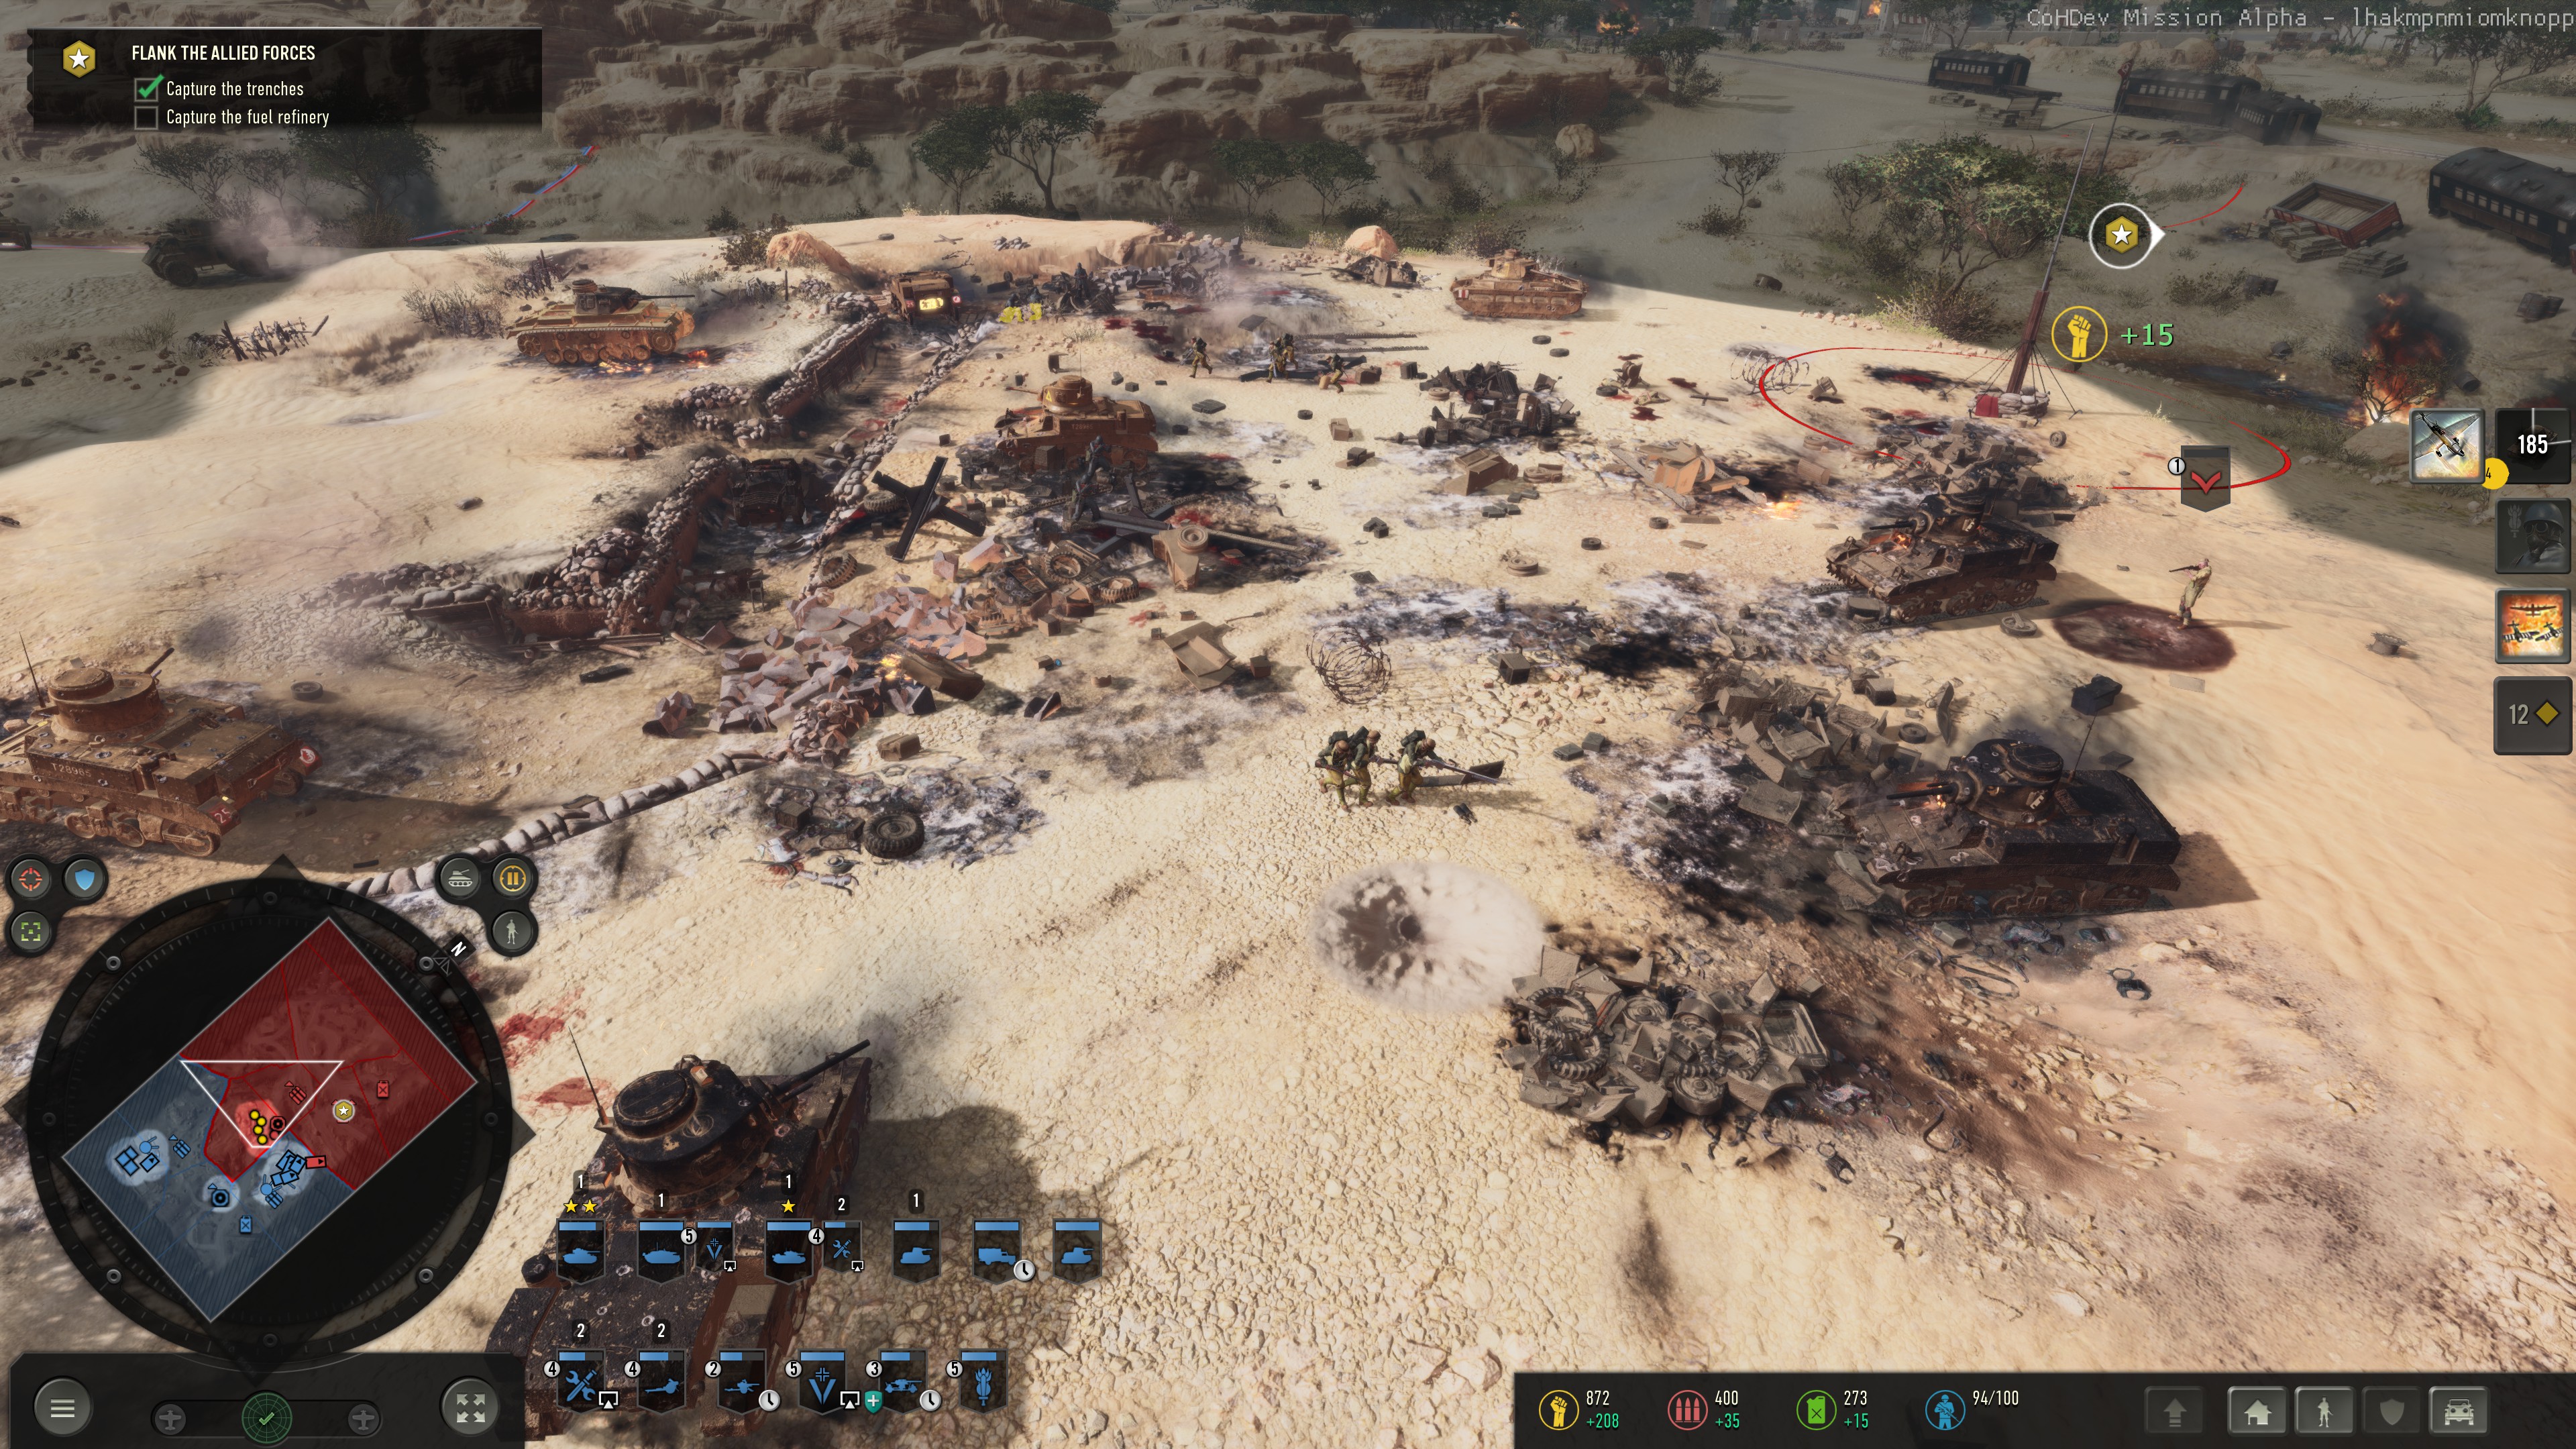 A completely destroyed battlefield with debris scattered everywhere